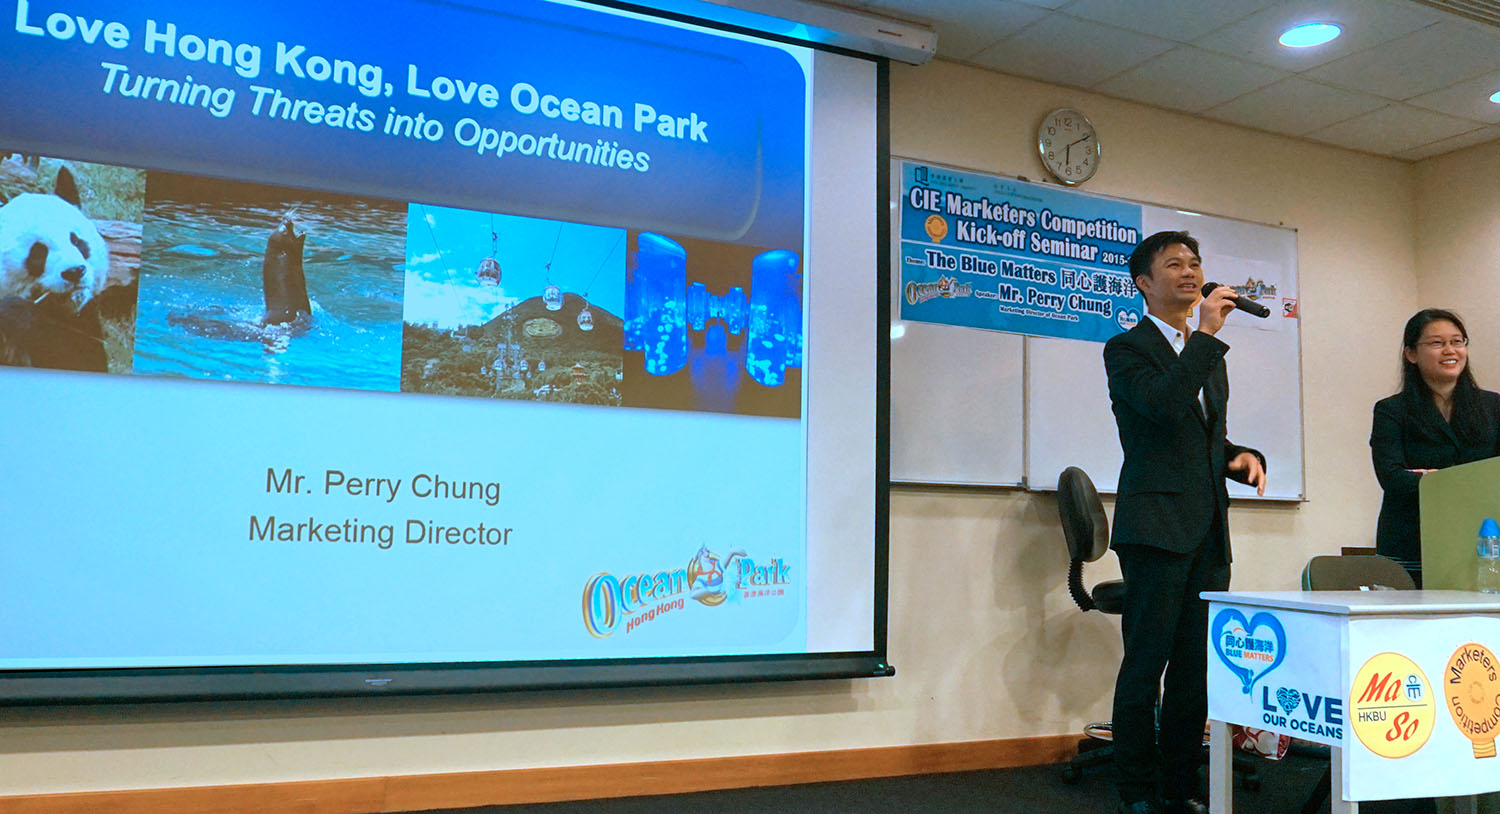 Mr. Perry Chung, Marketing Director of Ocean Park (left) was invited to share his advice on how to write a good marketing proposal.